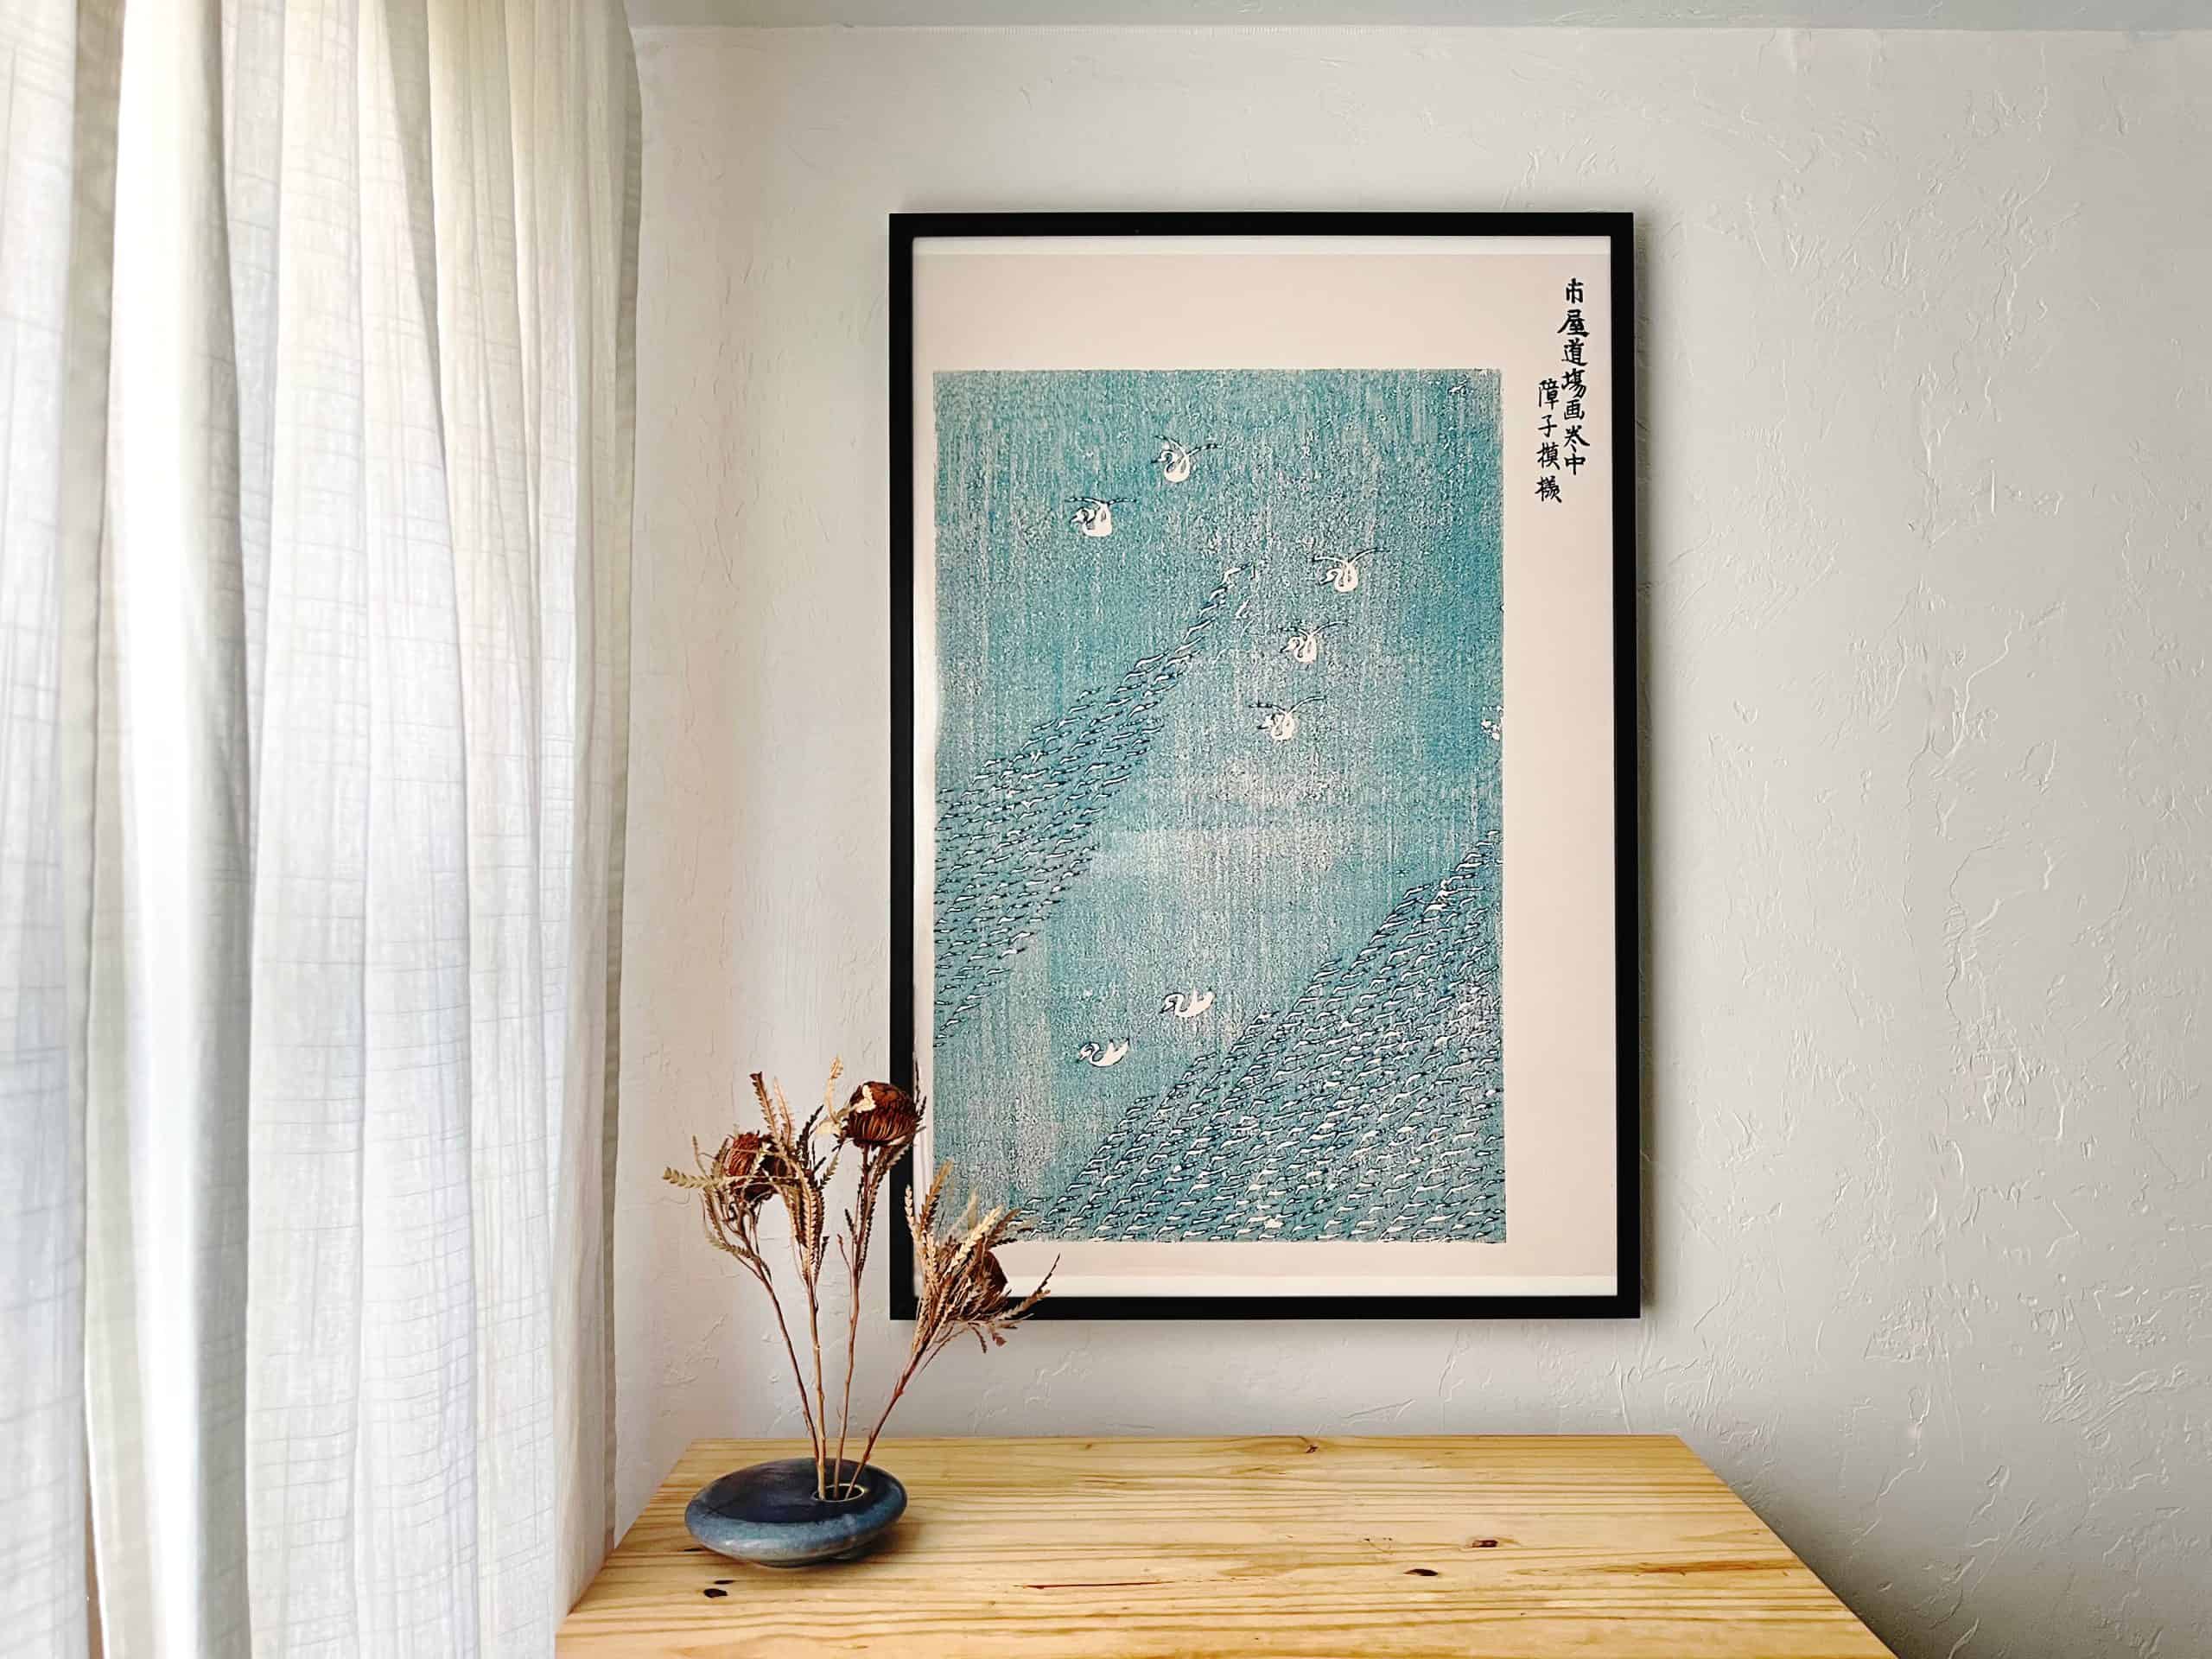 Frame poster of Blue lake by Taguchi Tomoki in black simple black frame hung above dresser with Japanese ikebana vase on one side, soft light entering through curtain for article from office posters to furniture: Unleash creativity with Society6